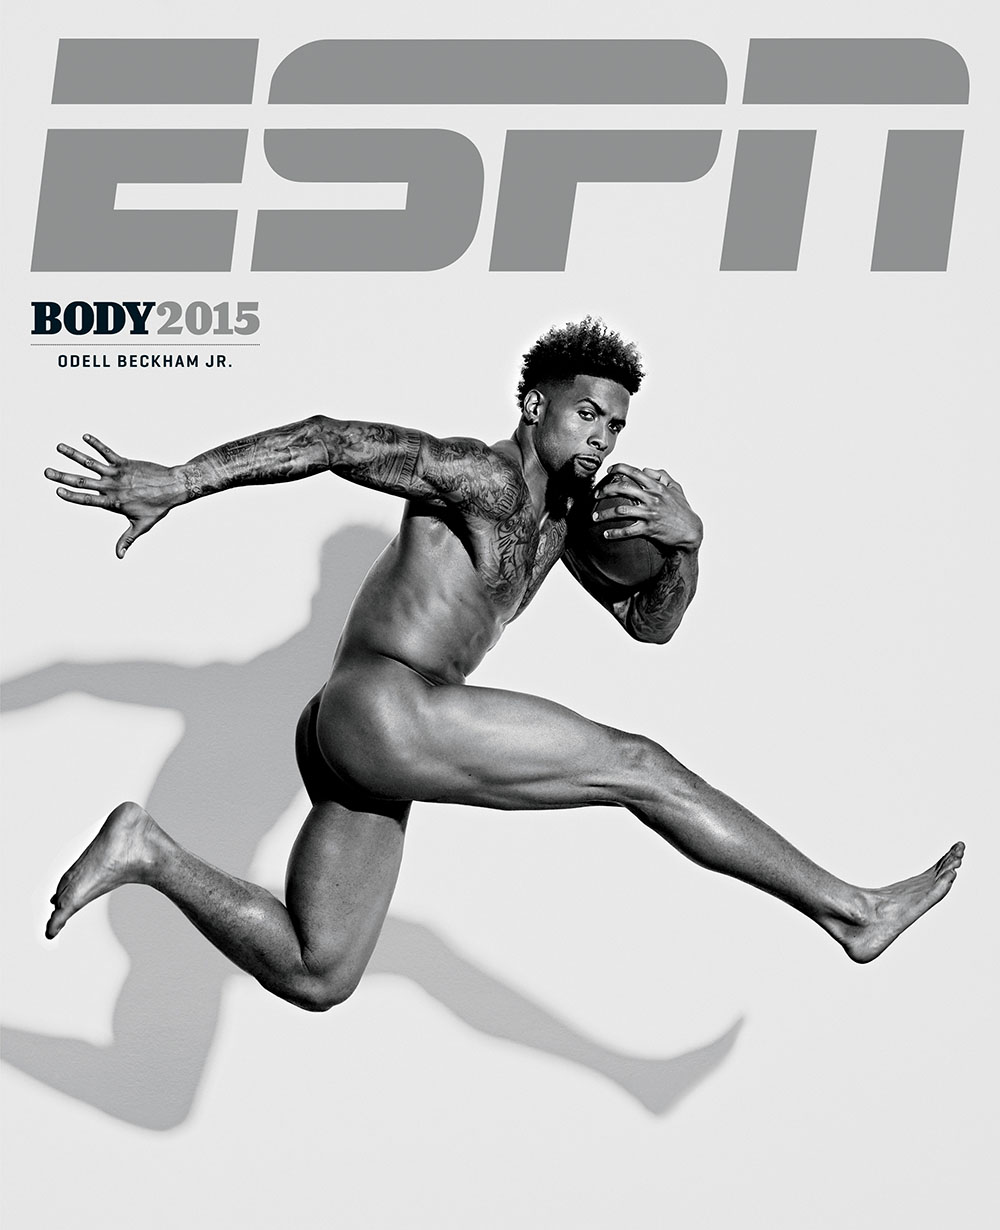 Photography News - Stunning sporty nudes by ESPN Odell Beckham Jr. photographed by Carlos Serrao